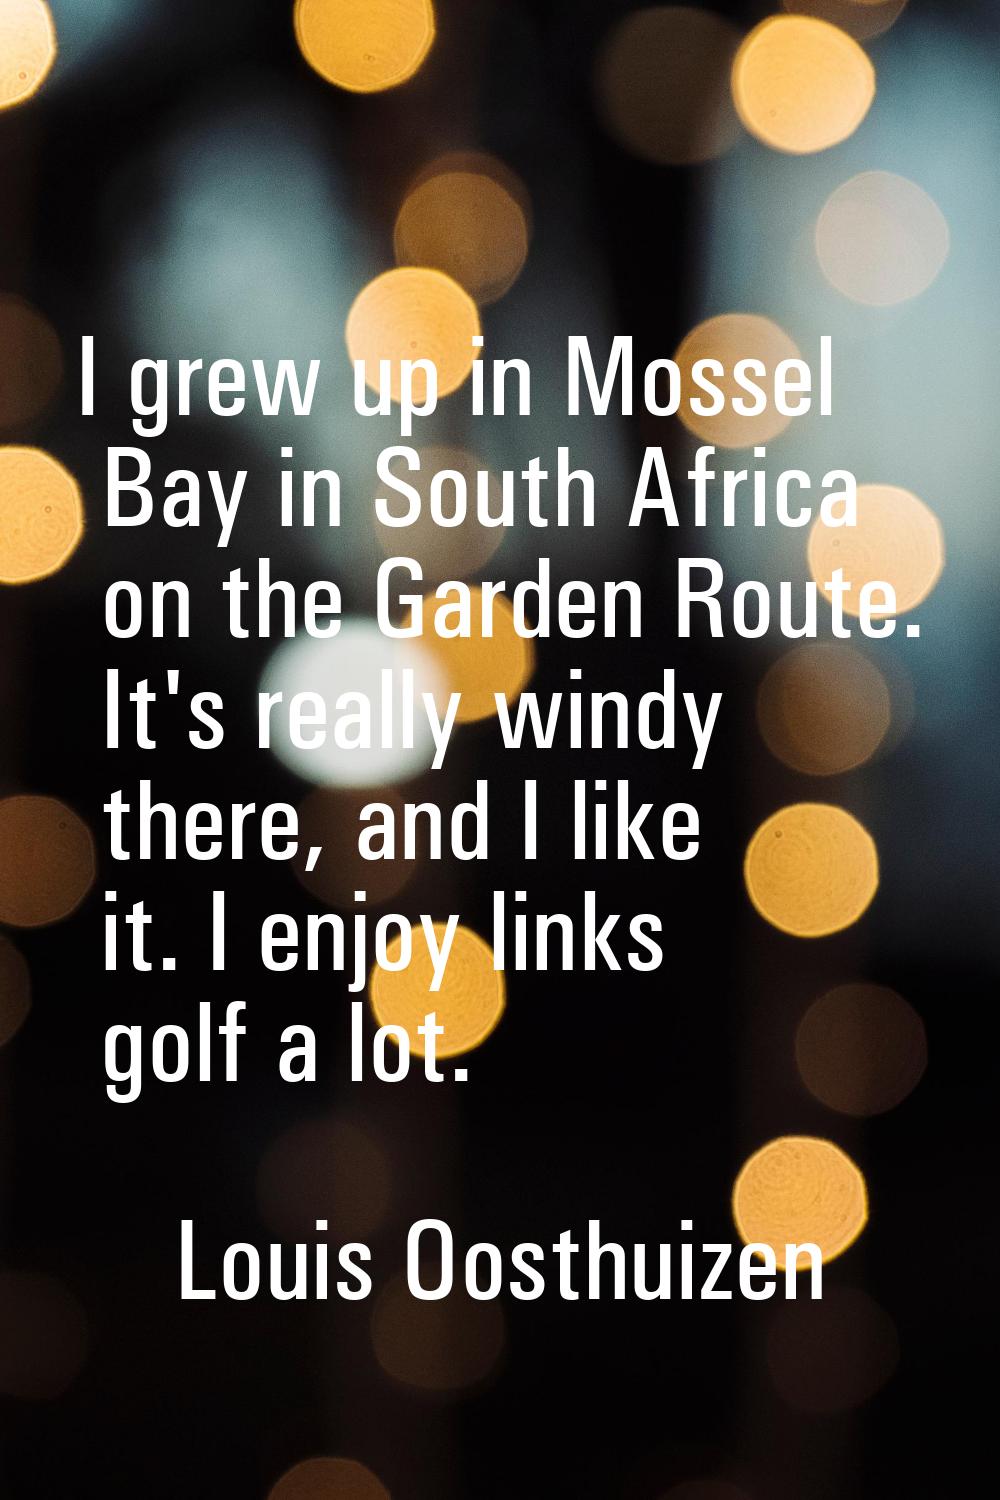 I grew up in Mossel Bay in South Africa on the Garden Route. It's really windy there, and I like it